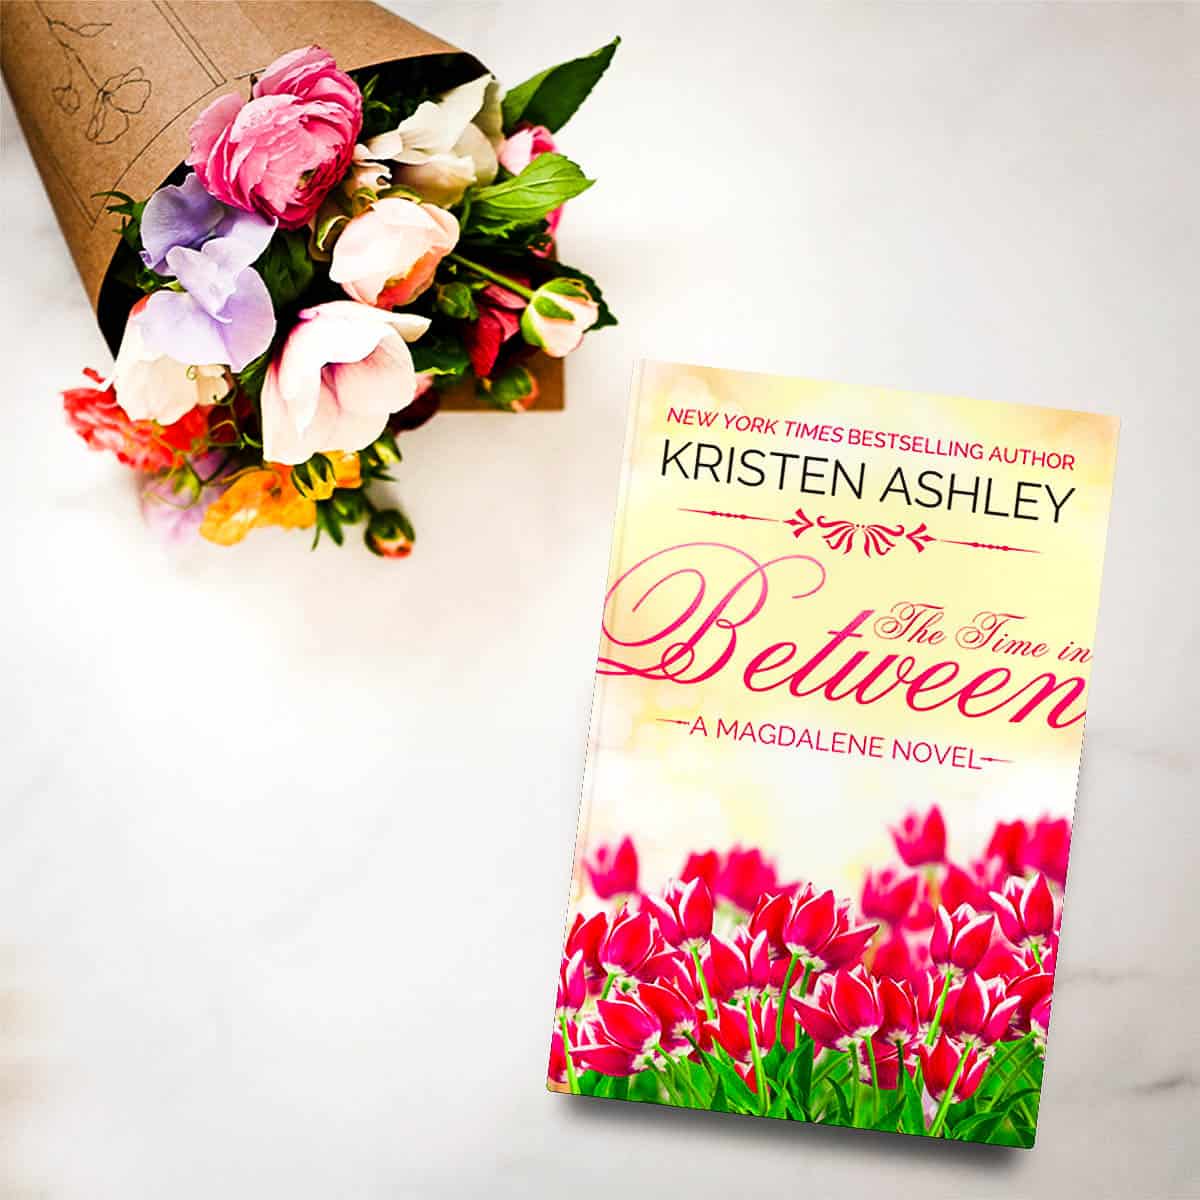 Read an Excerpt from The Time in Between by Kristen Ashley!